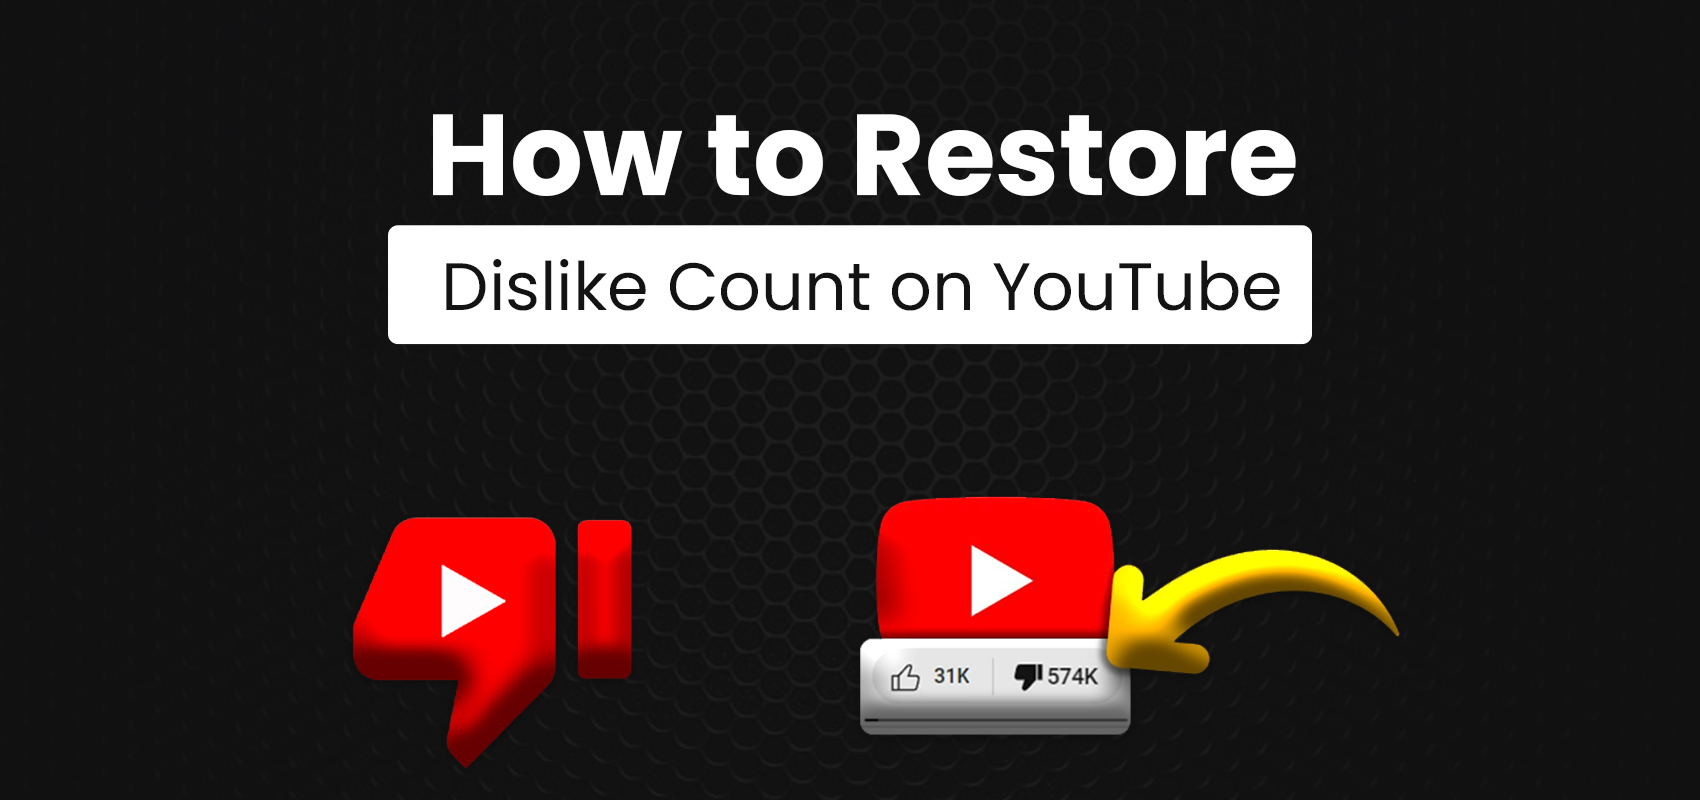 How to Restore Dislike Count on YouTube